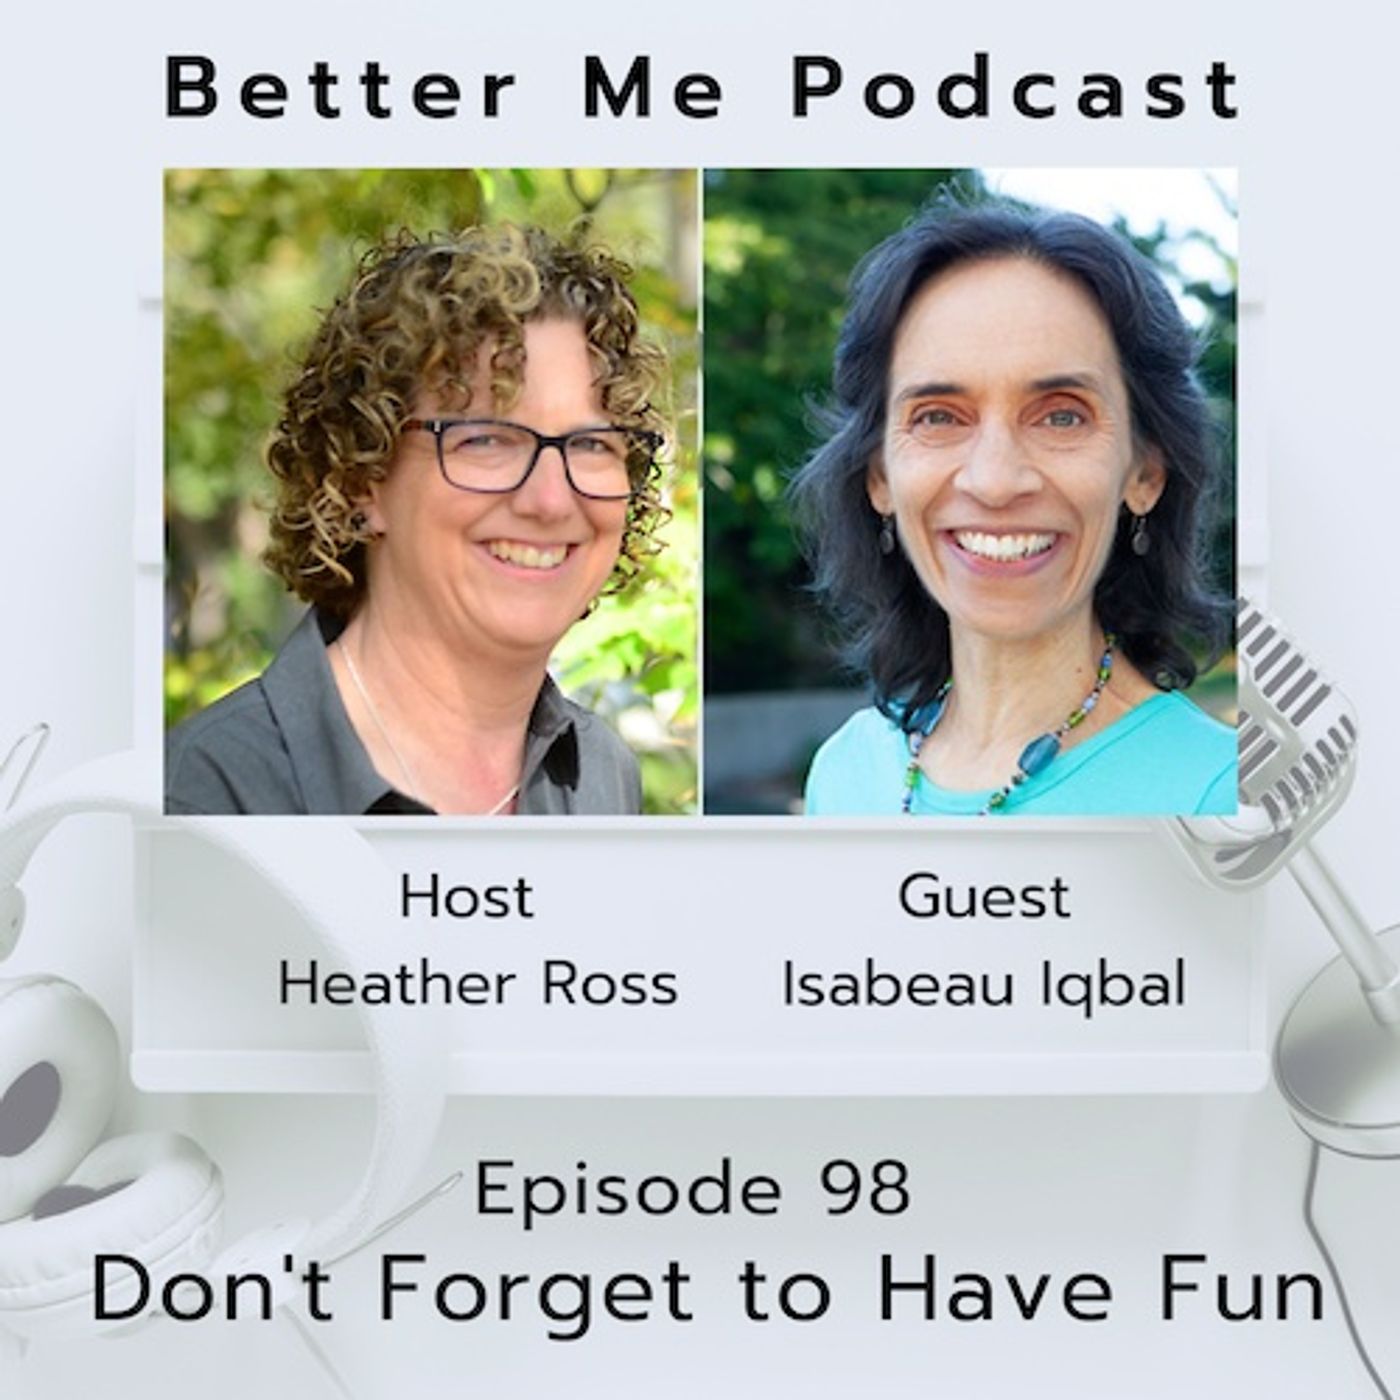 EP 98 Don’t Forget to Have Fun (with guest Isabeau Iqbal)